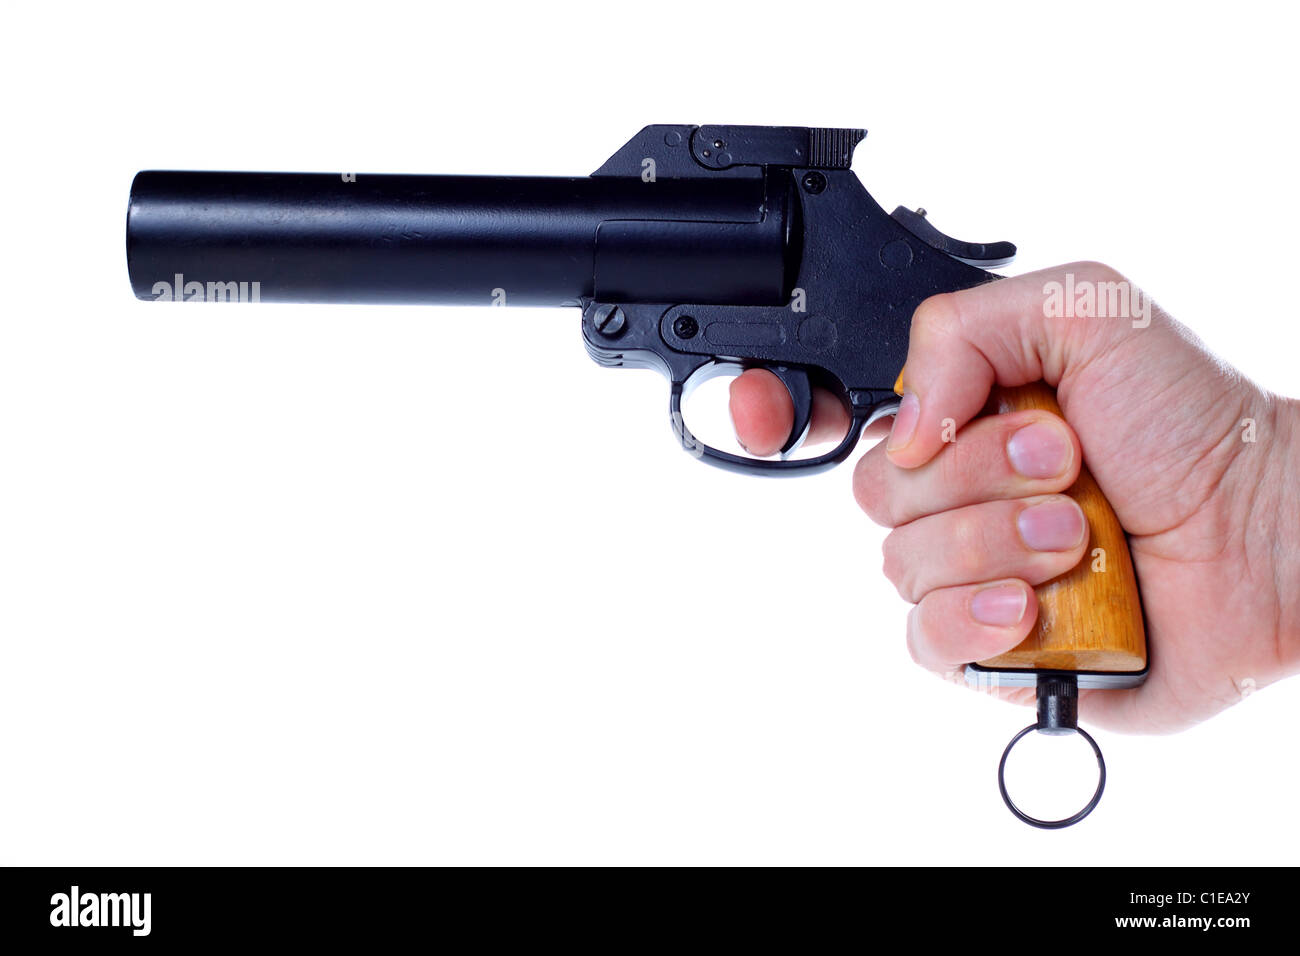 Flare gun aimed cocked in right hand Stock Photo